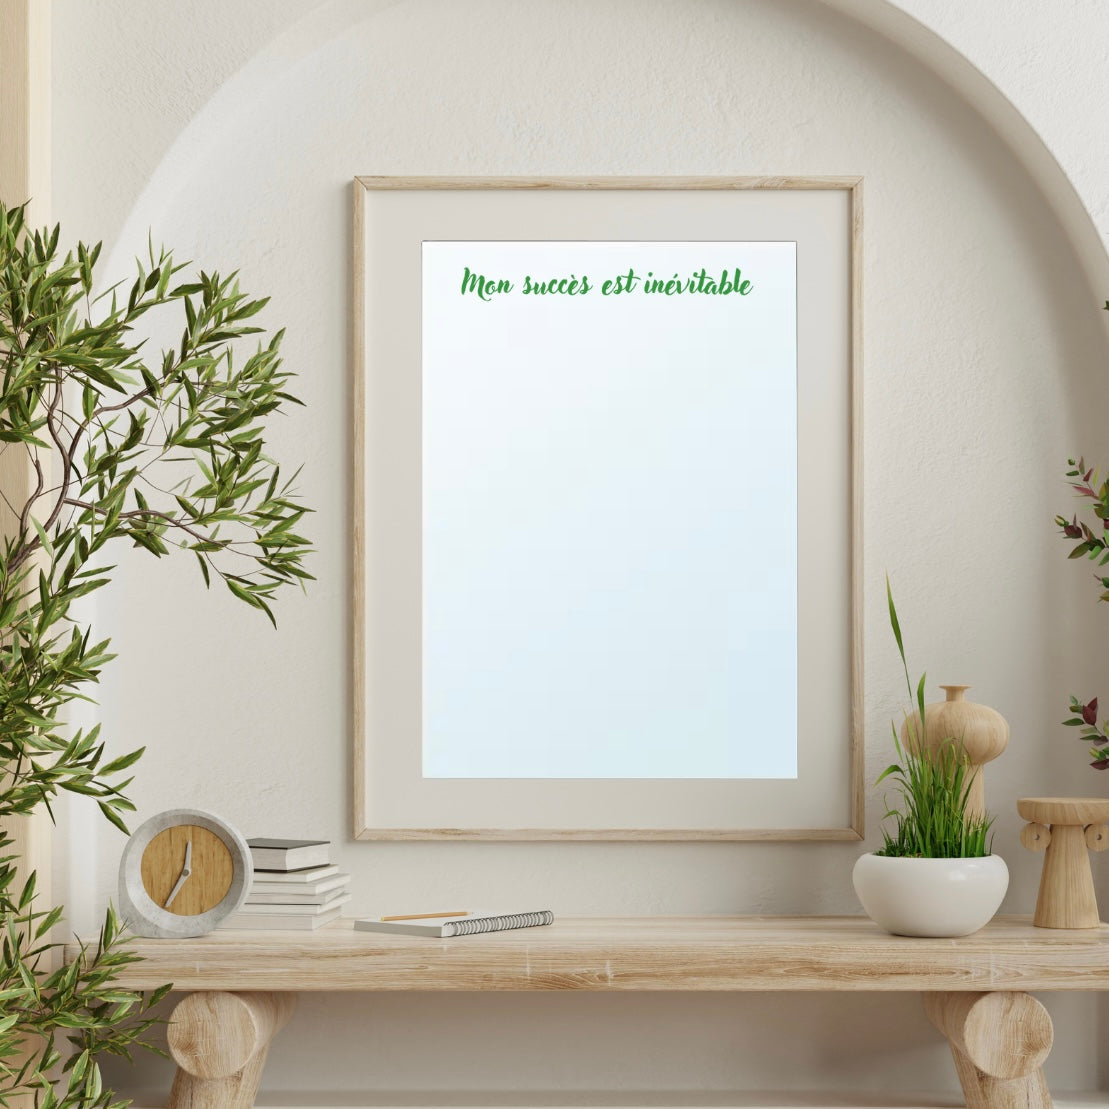 An A4 mirror showcasing the empowering affirmation 'My success is inevitable' in stylish green lettering.